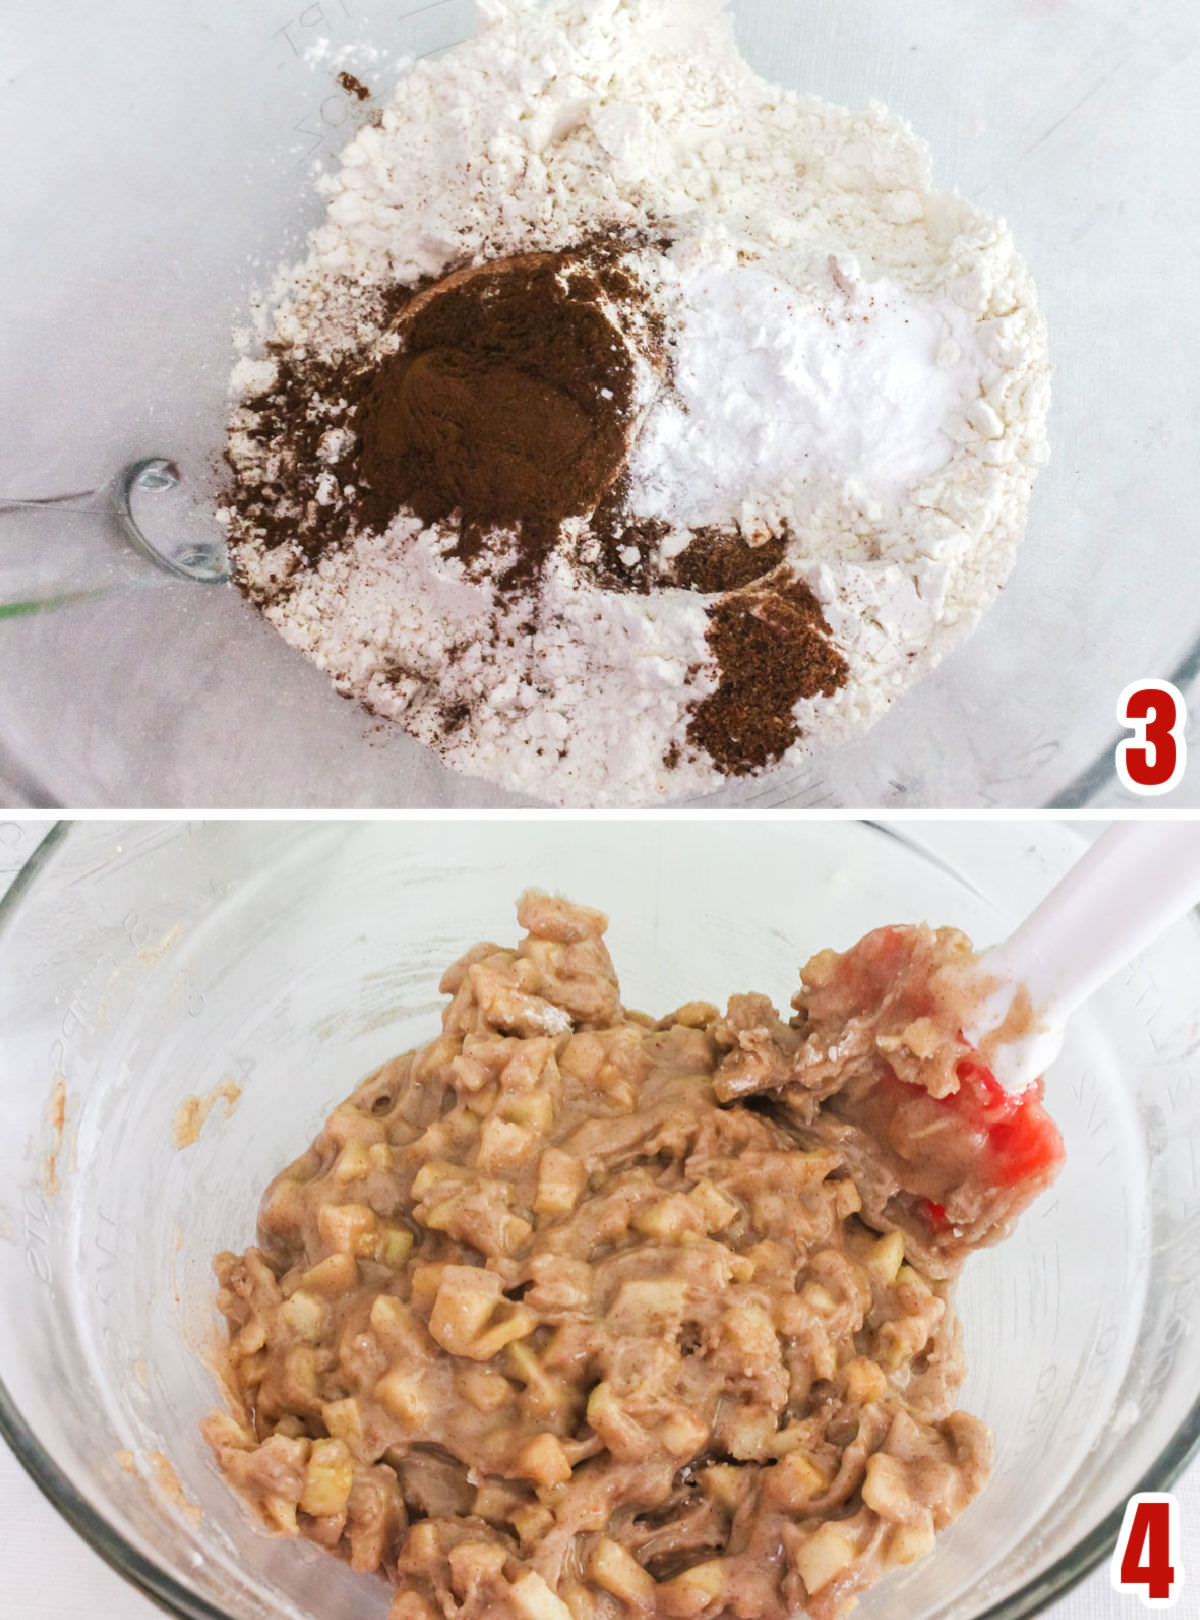 Collage image showing the steps for adding the dry ingredients to the Apple Bread batter.